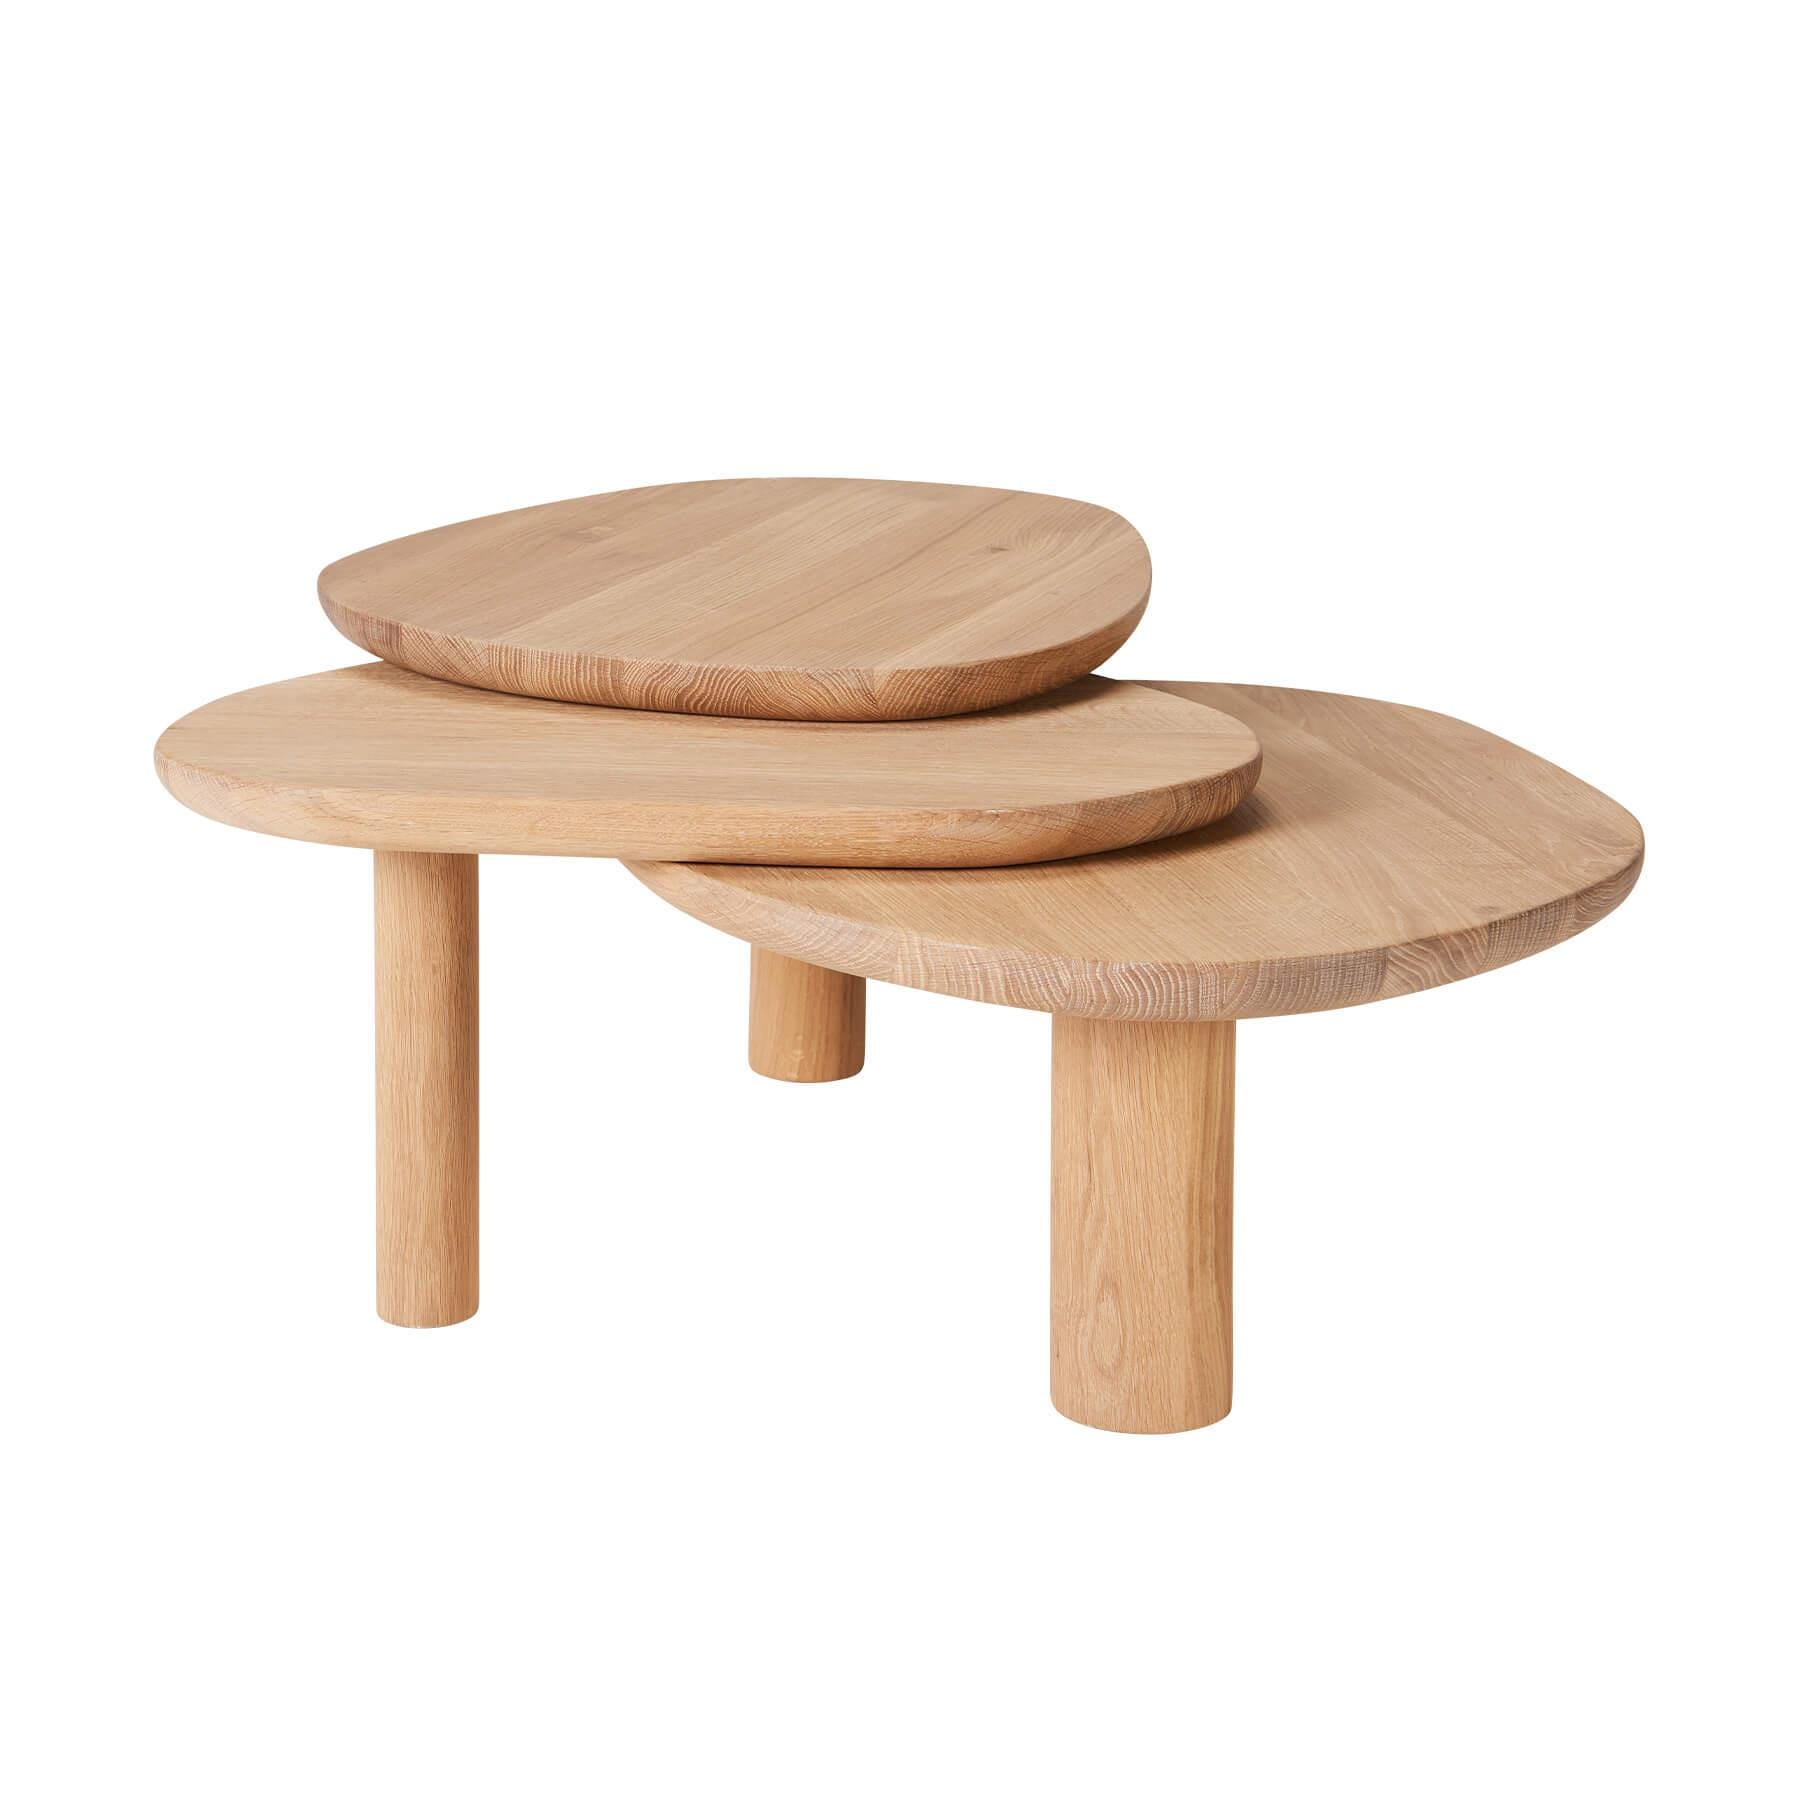 Bolia Latch Coffee Table Oiled Oak Light Wood Designer Furniture From Holloways Of Ludlow